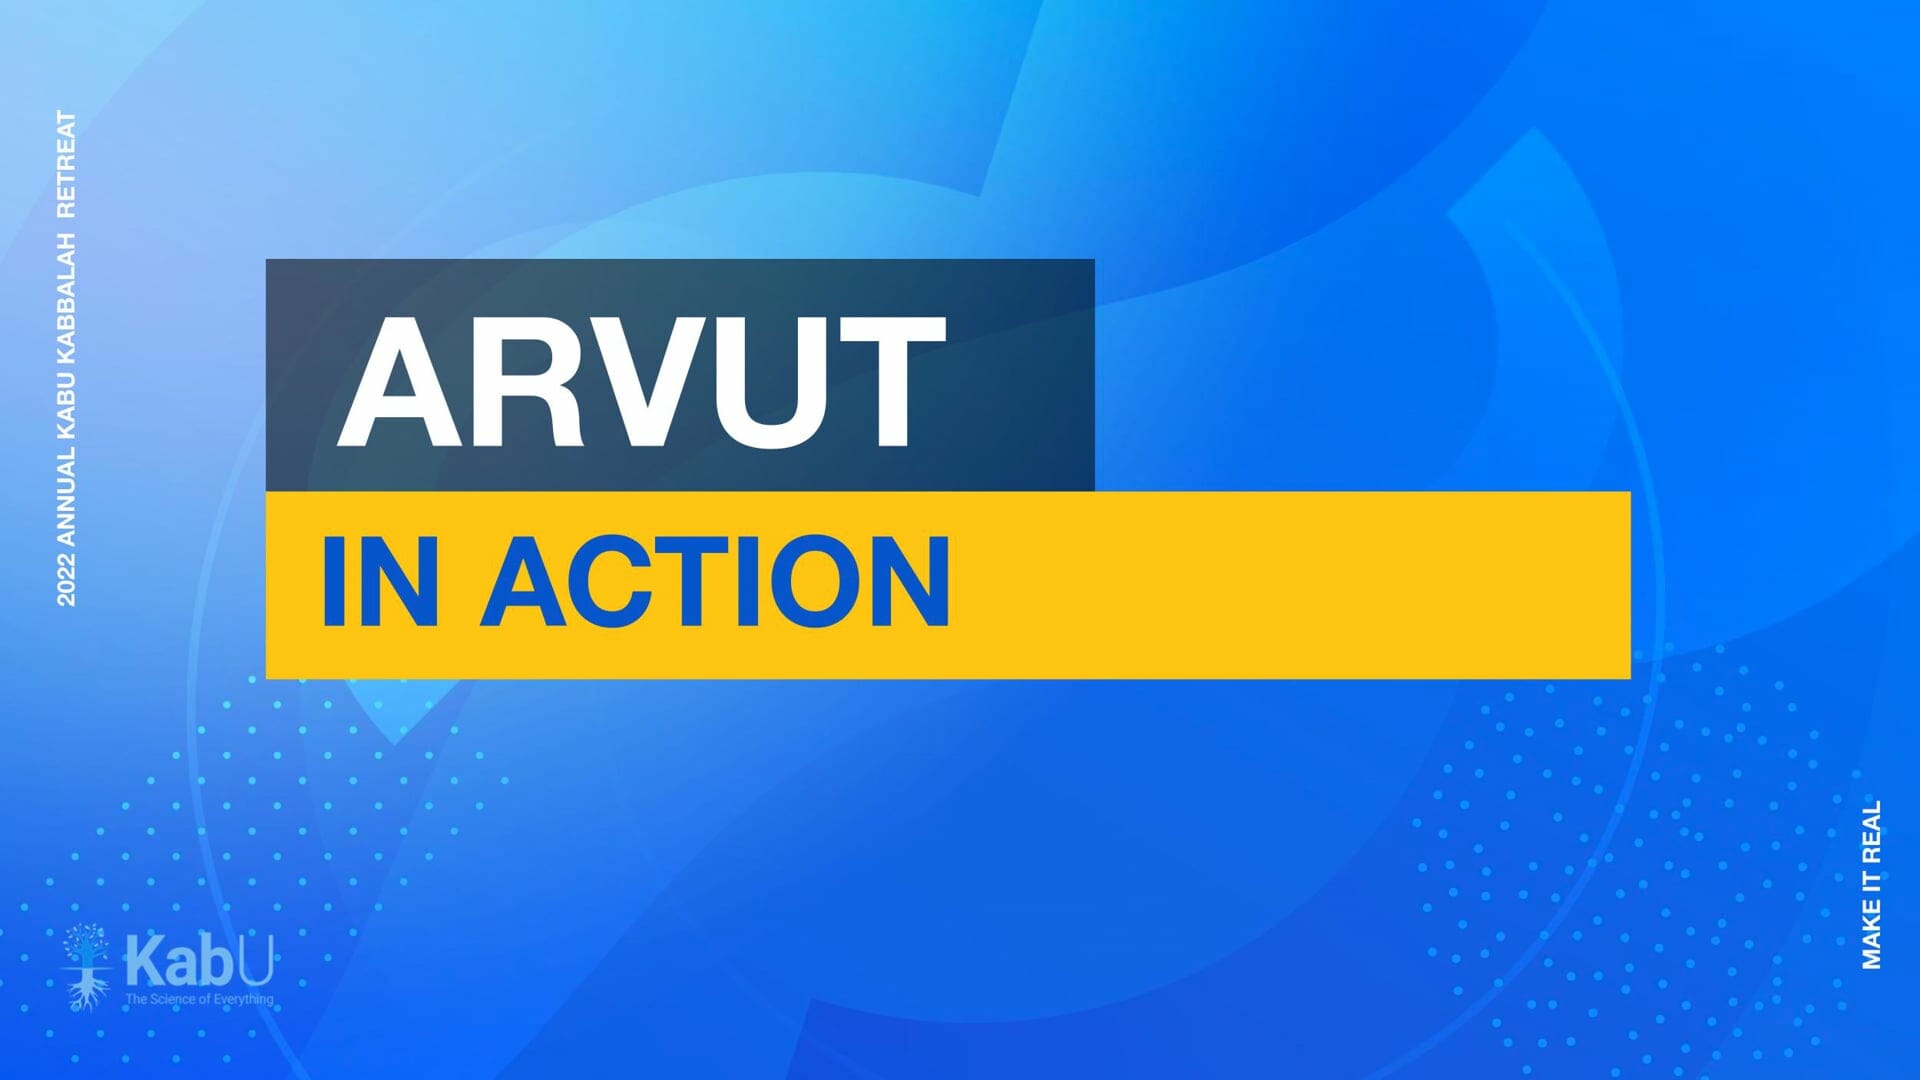 Sept 9, 2022 – Arvut in Action